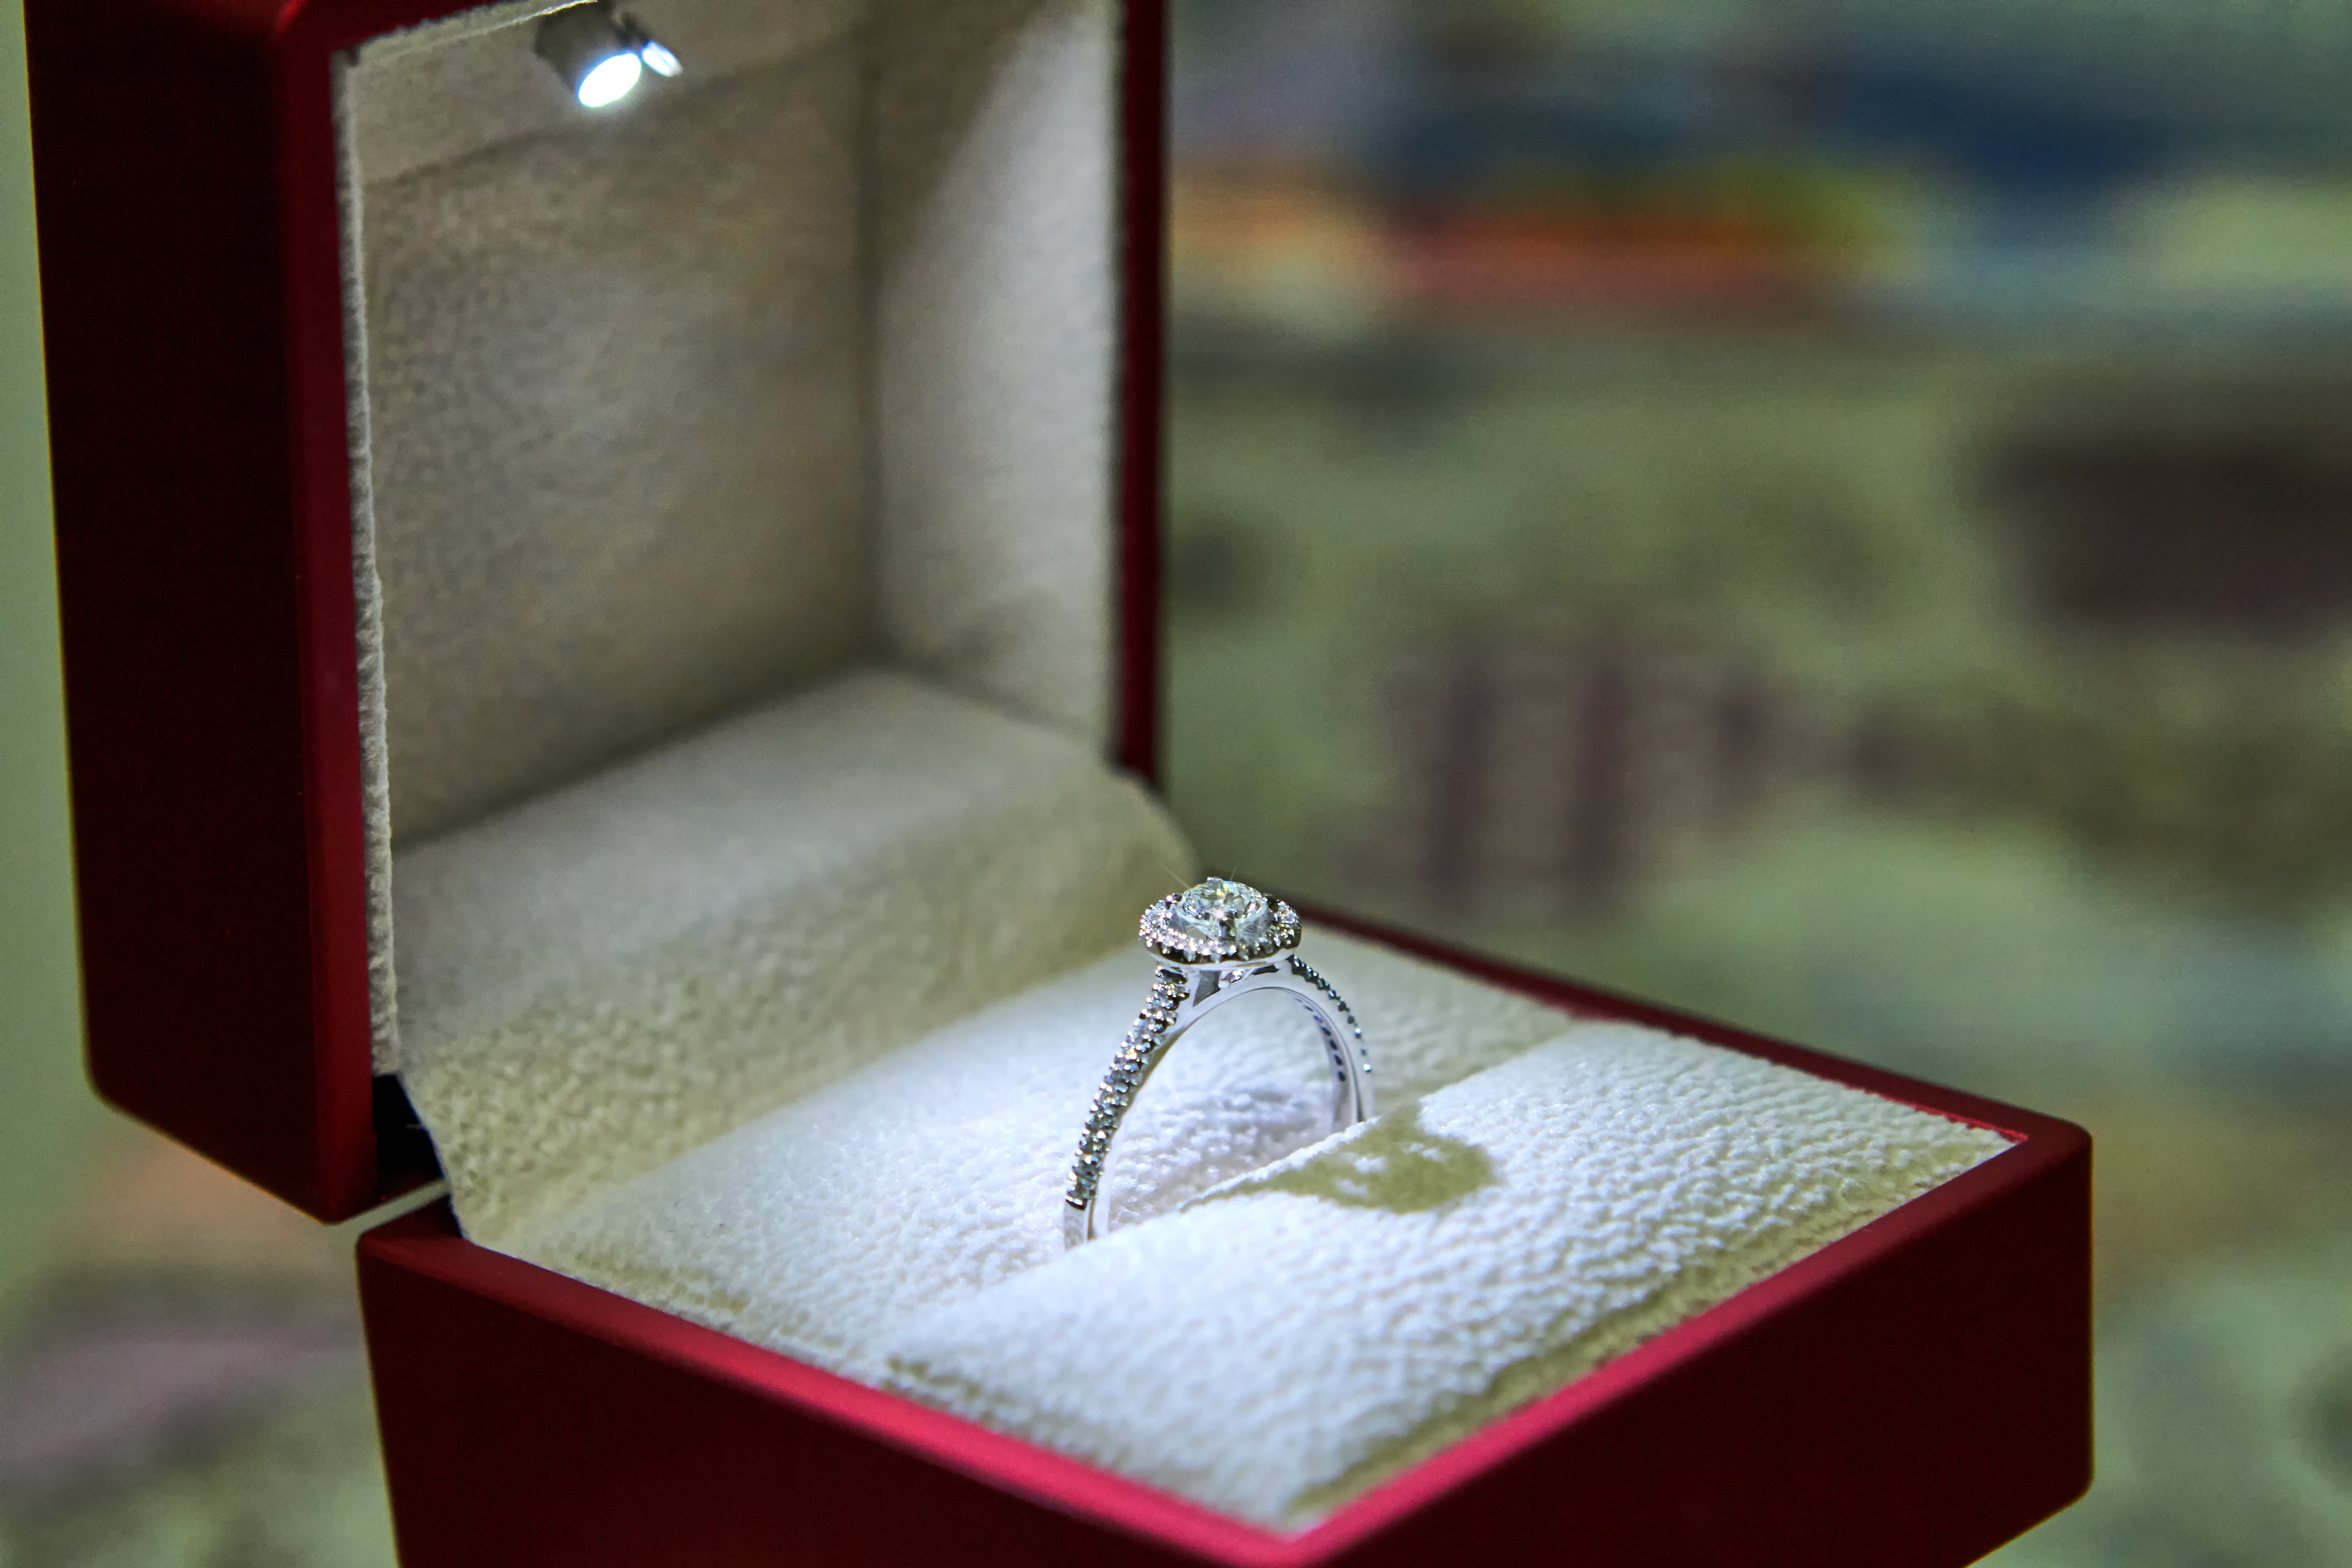 Jewelry production. White gold diamond ring in ice-lit gift box. Wedding, engagement, marriage proposal.